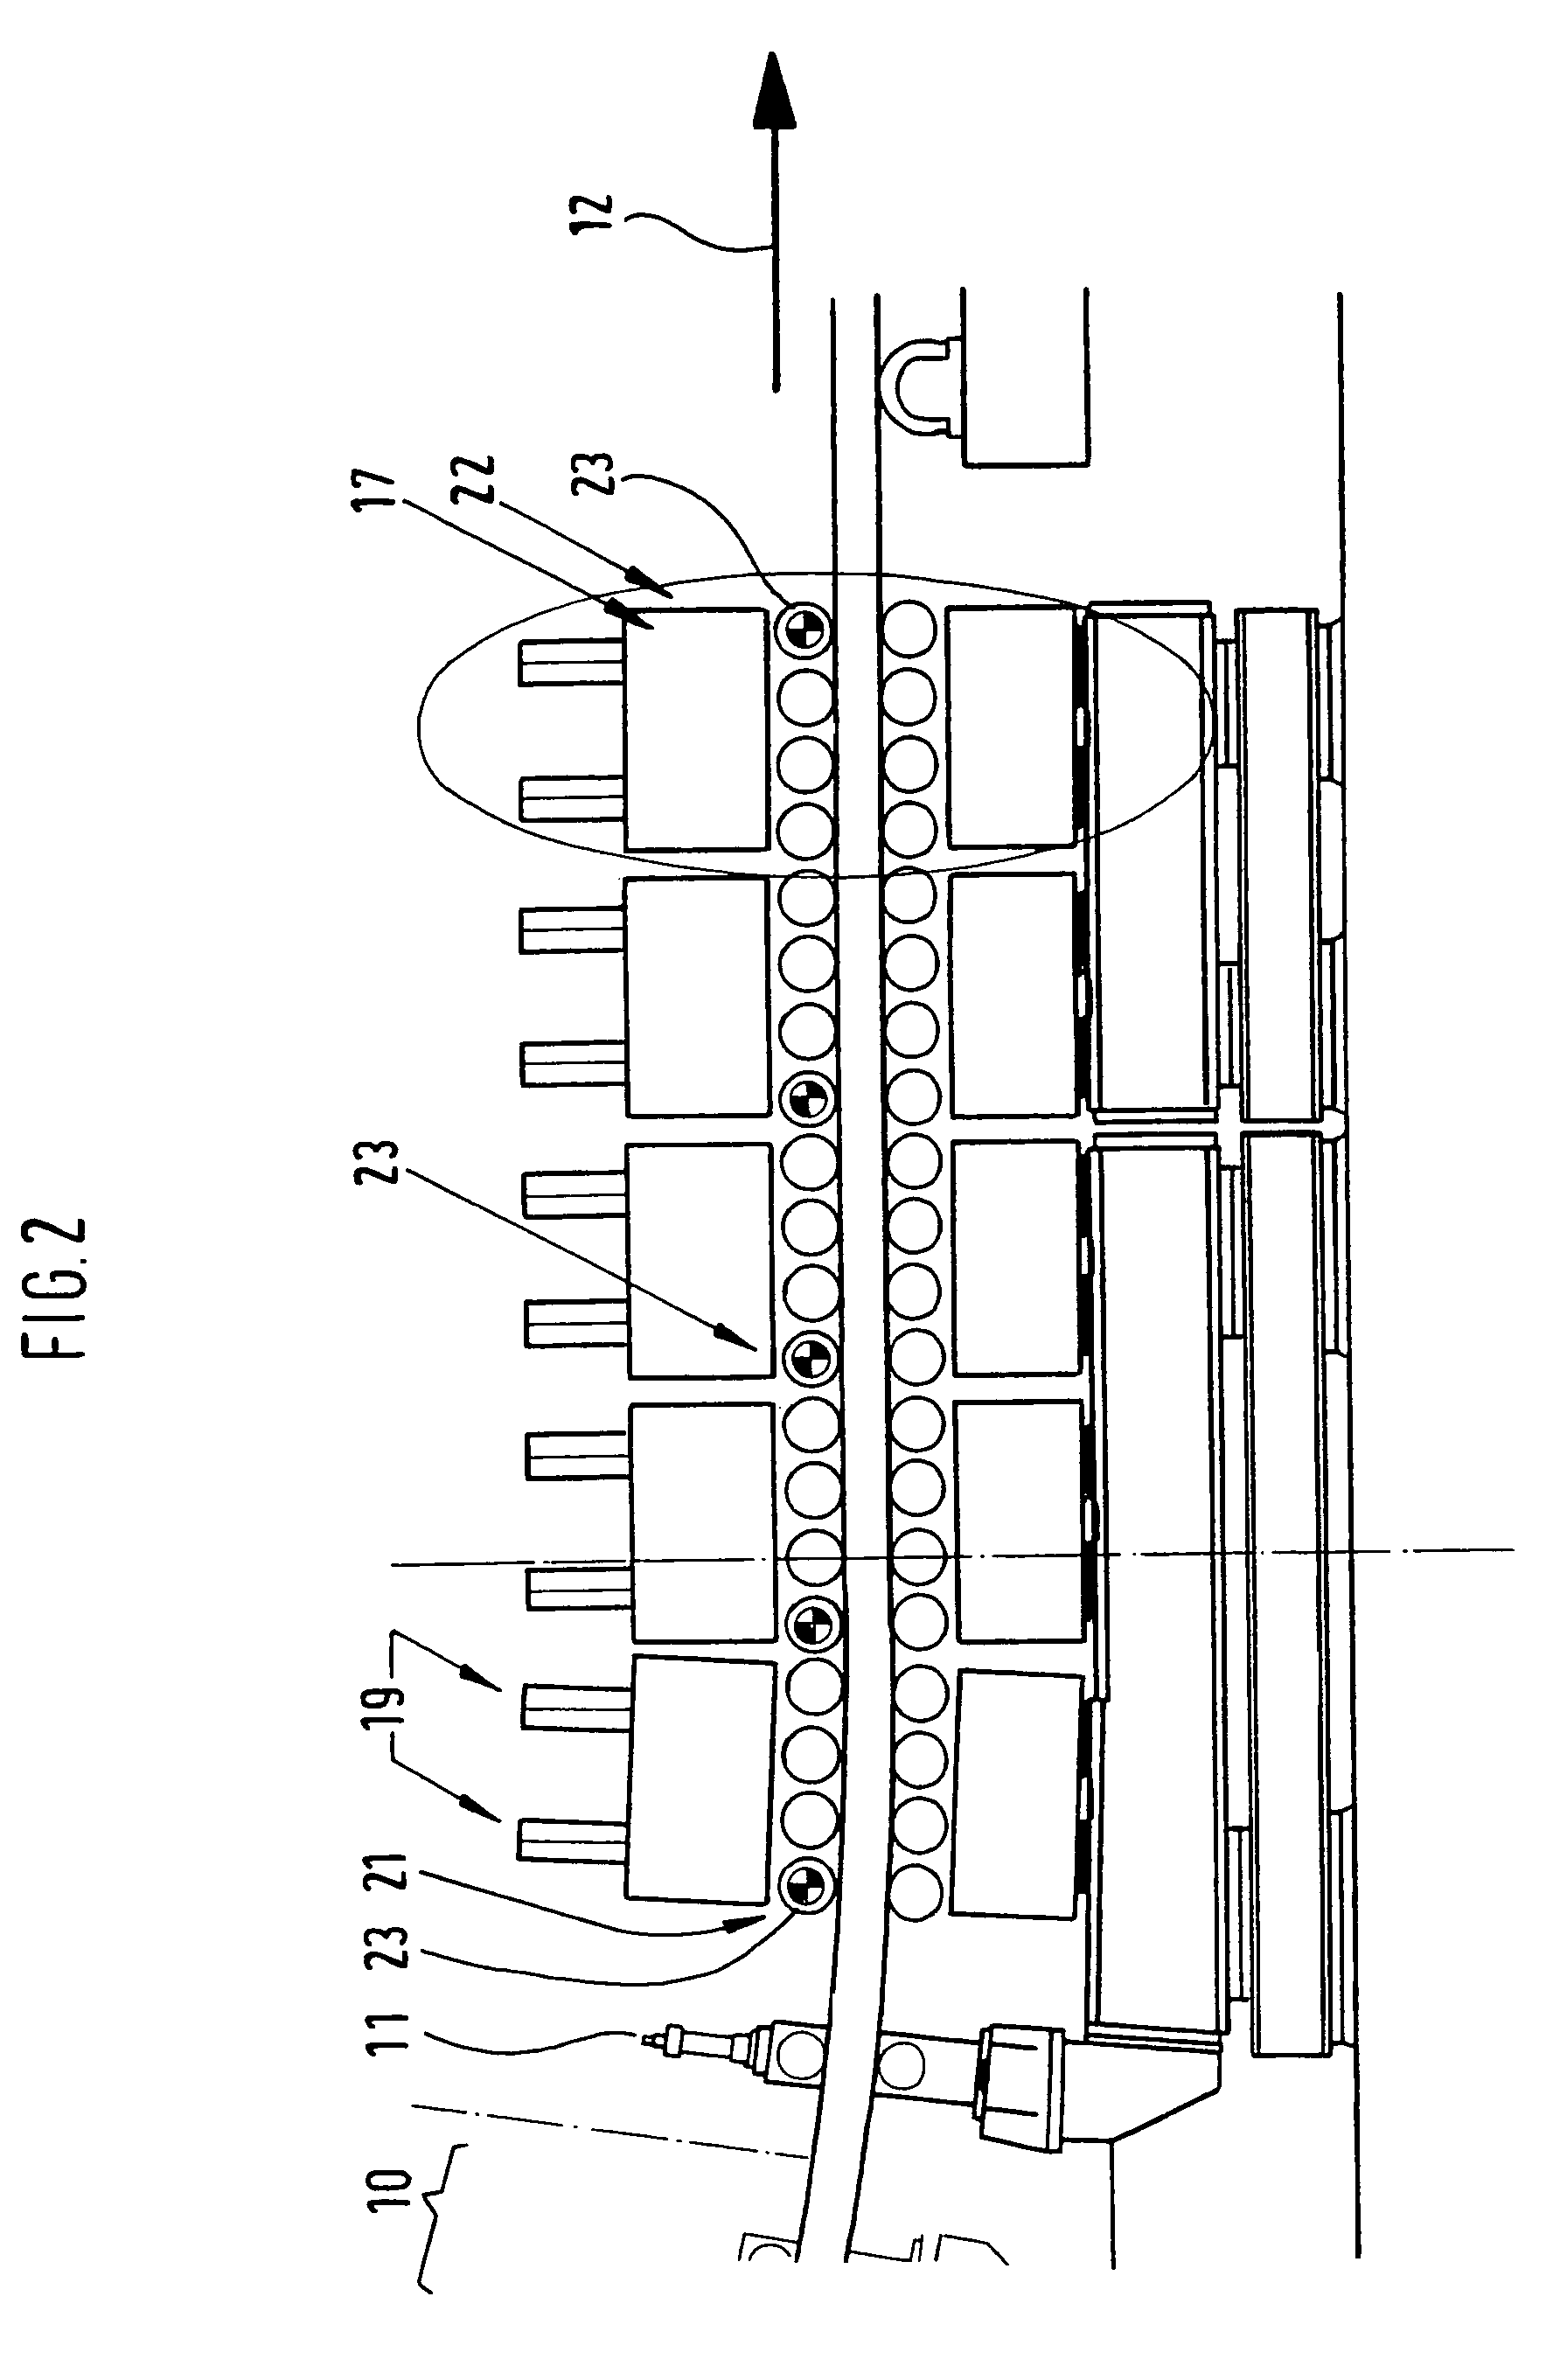 Method and device for dynamically resting roller segments that support and/or guide both sides of a cast bar made of metal, particularly steel